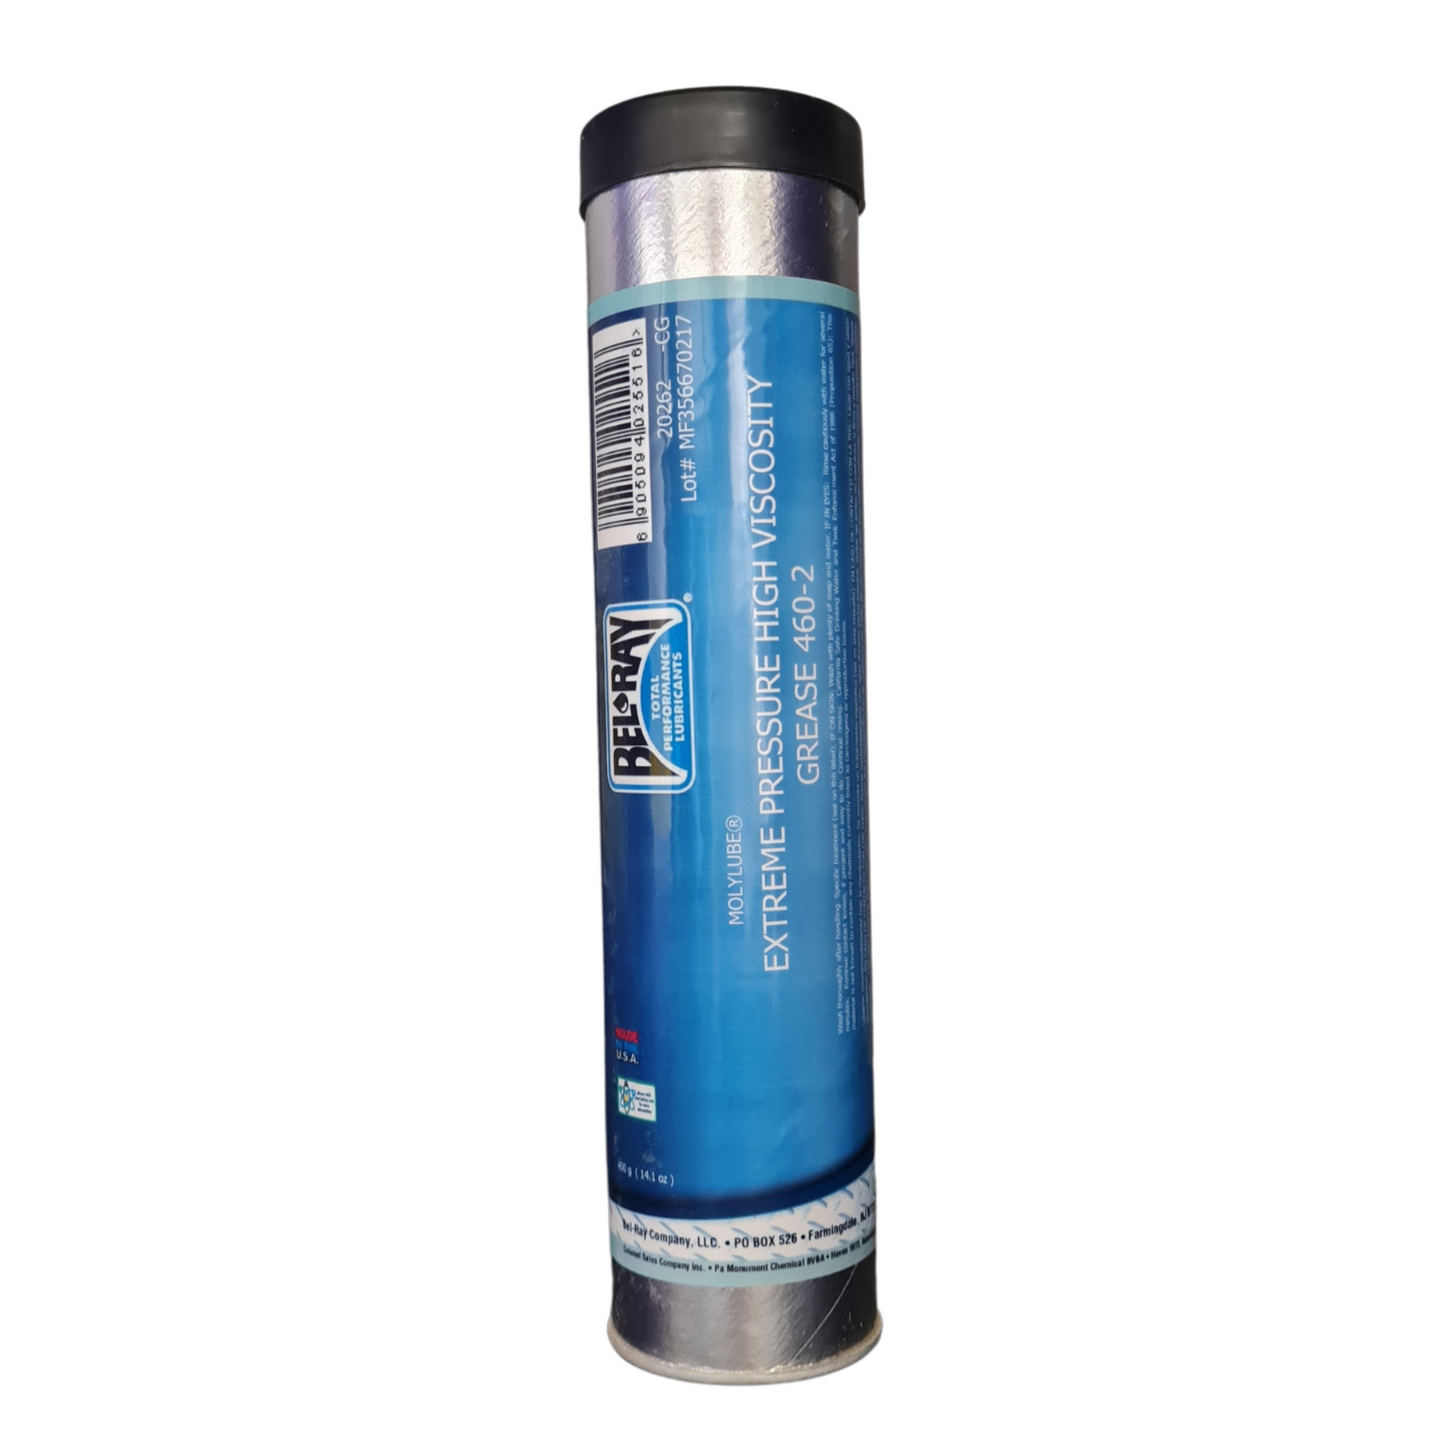 Bel-Ray Molylube® Extreme Pressure High Viscosity Grease